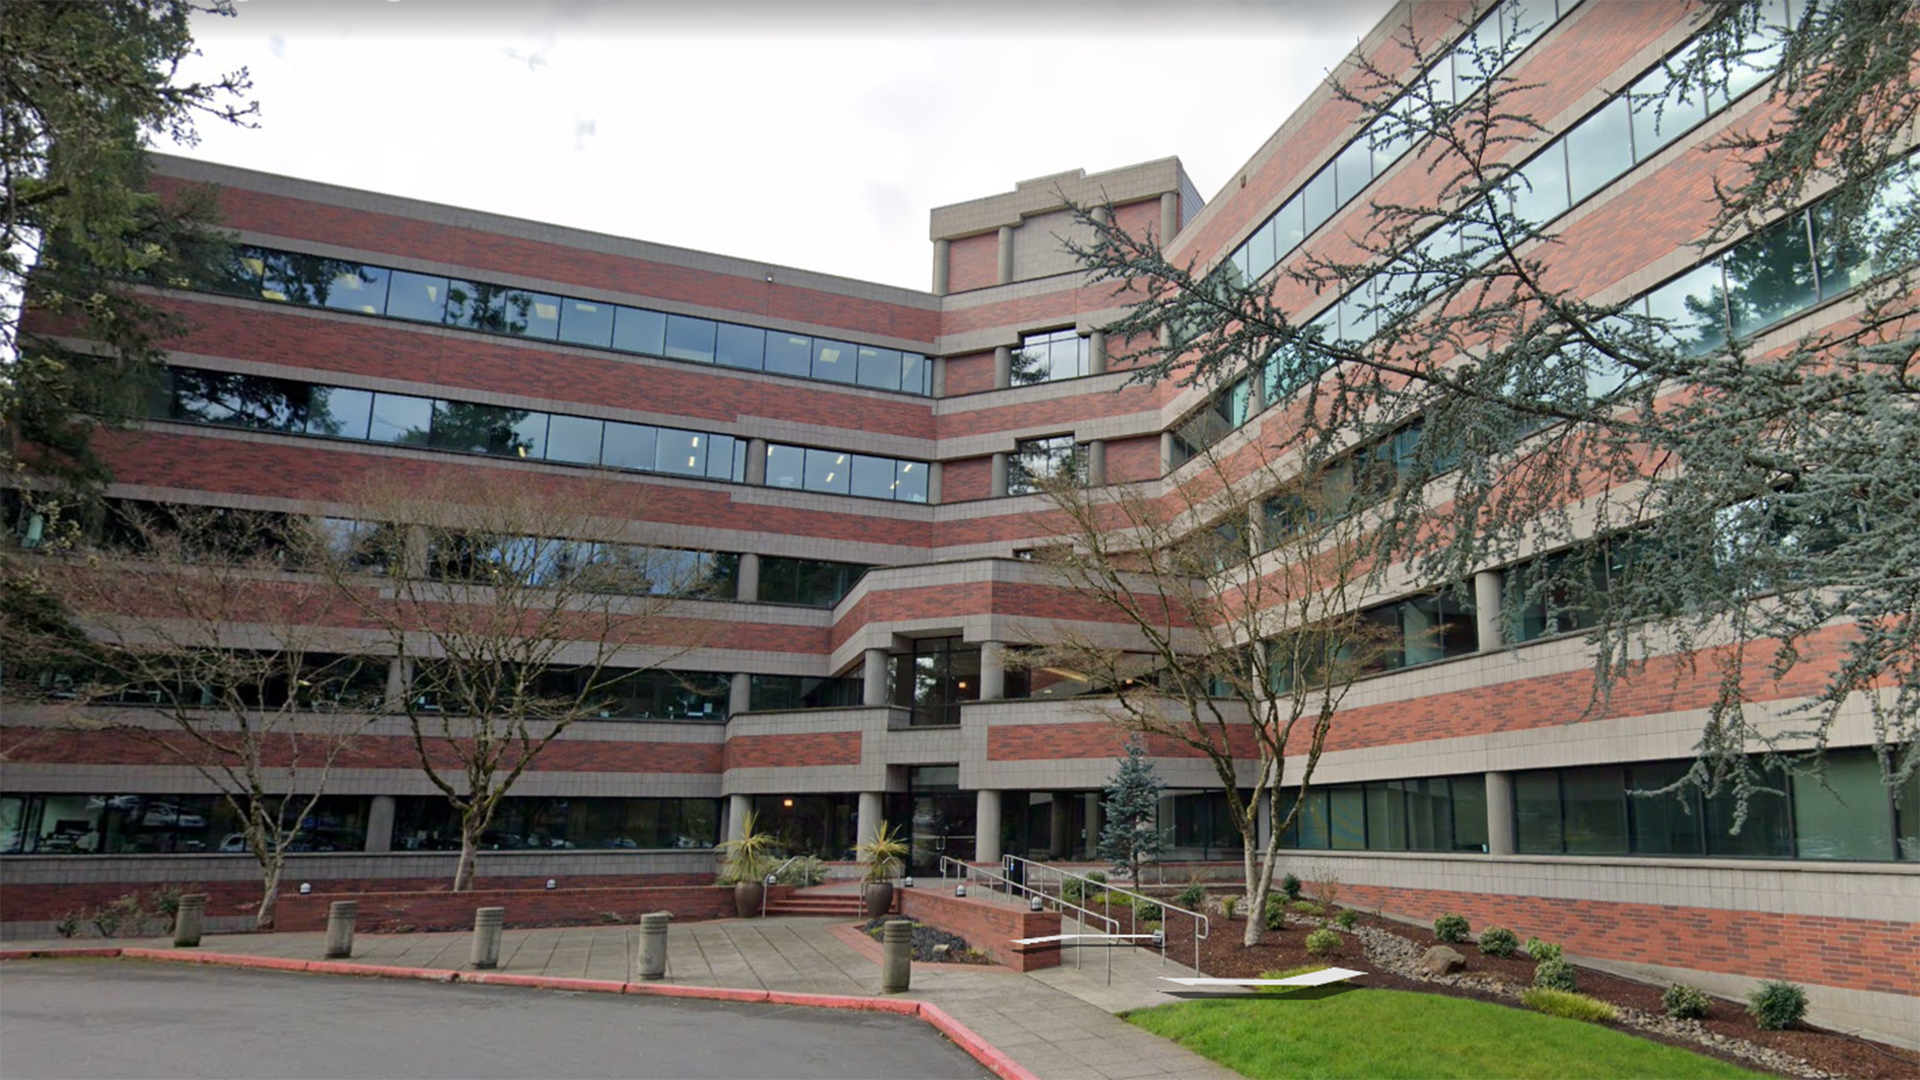 Sublease at 5 Centerpointe, Lake Oswego, OR